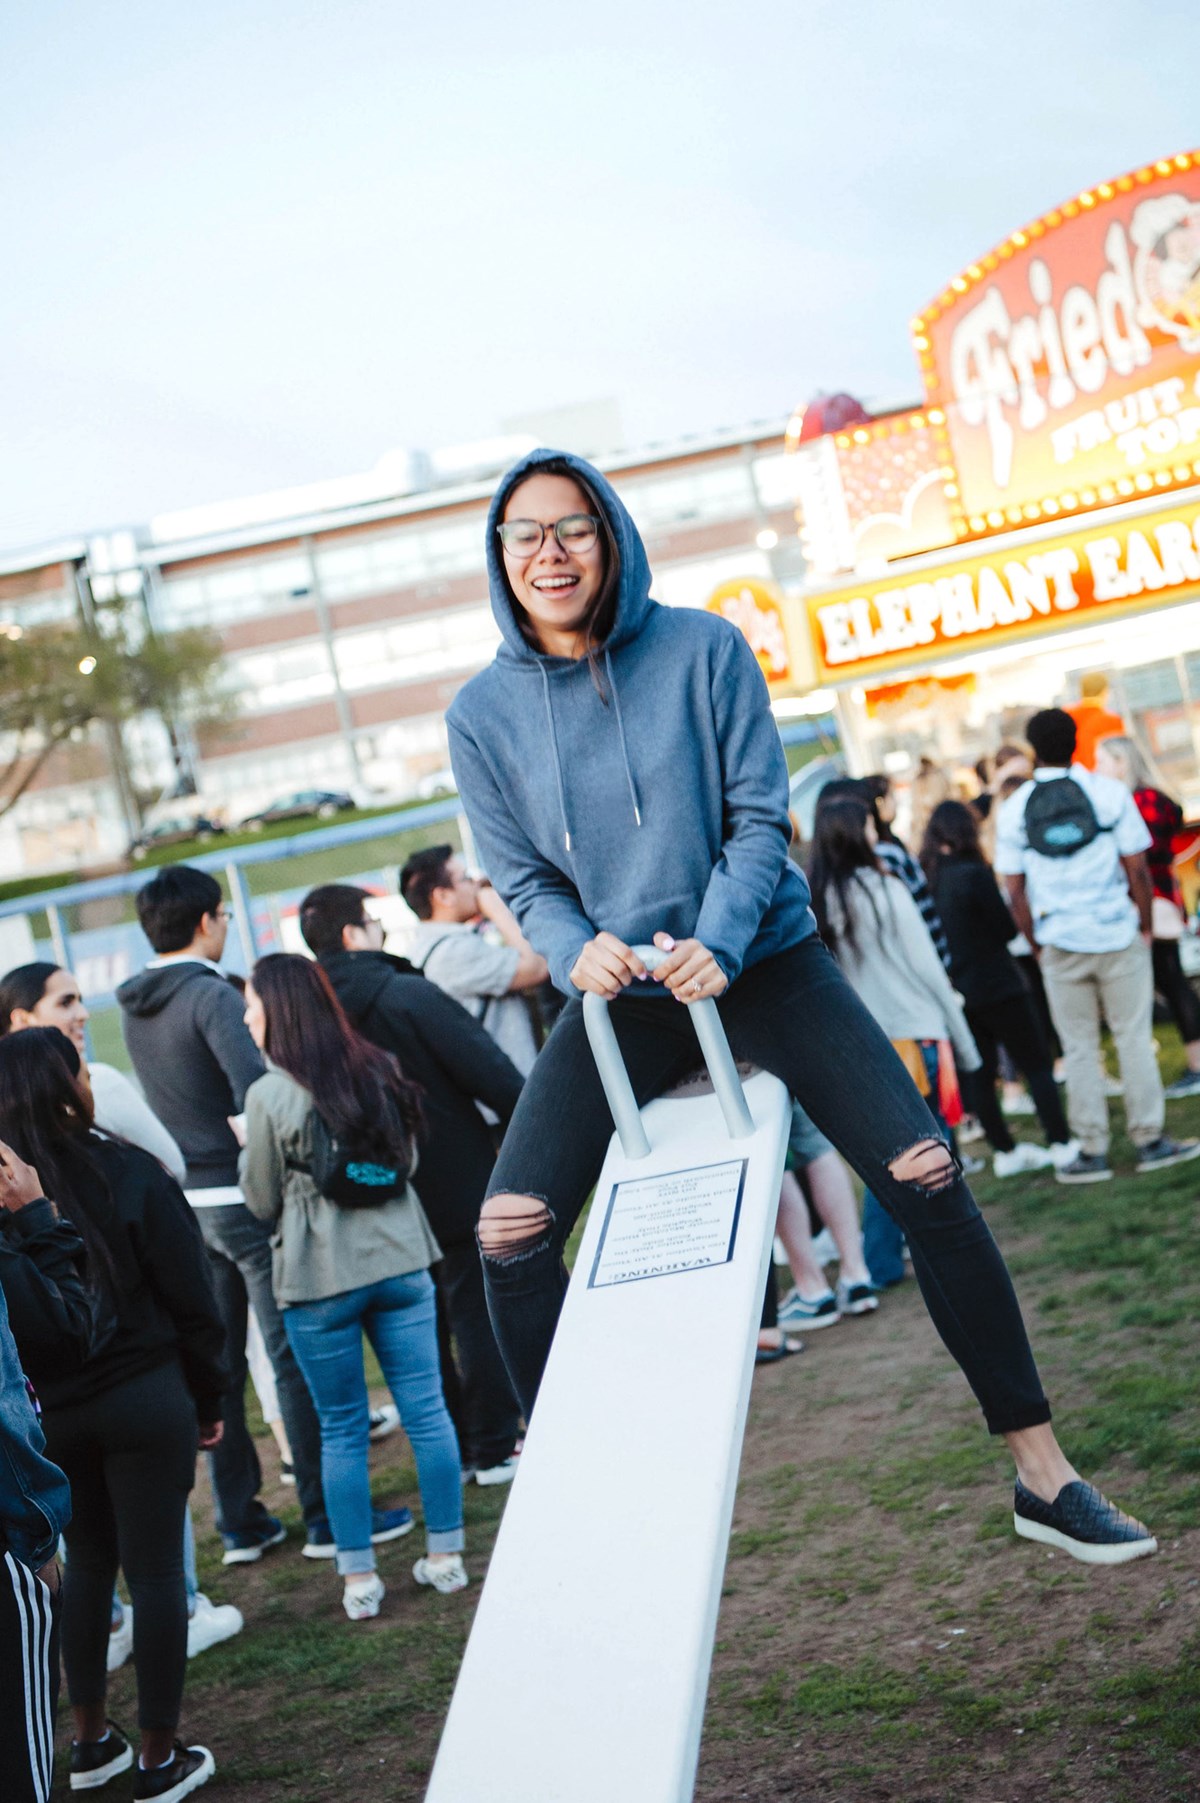 Student in hoodie on a seesaw with a carnival behind them.